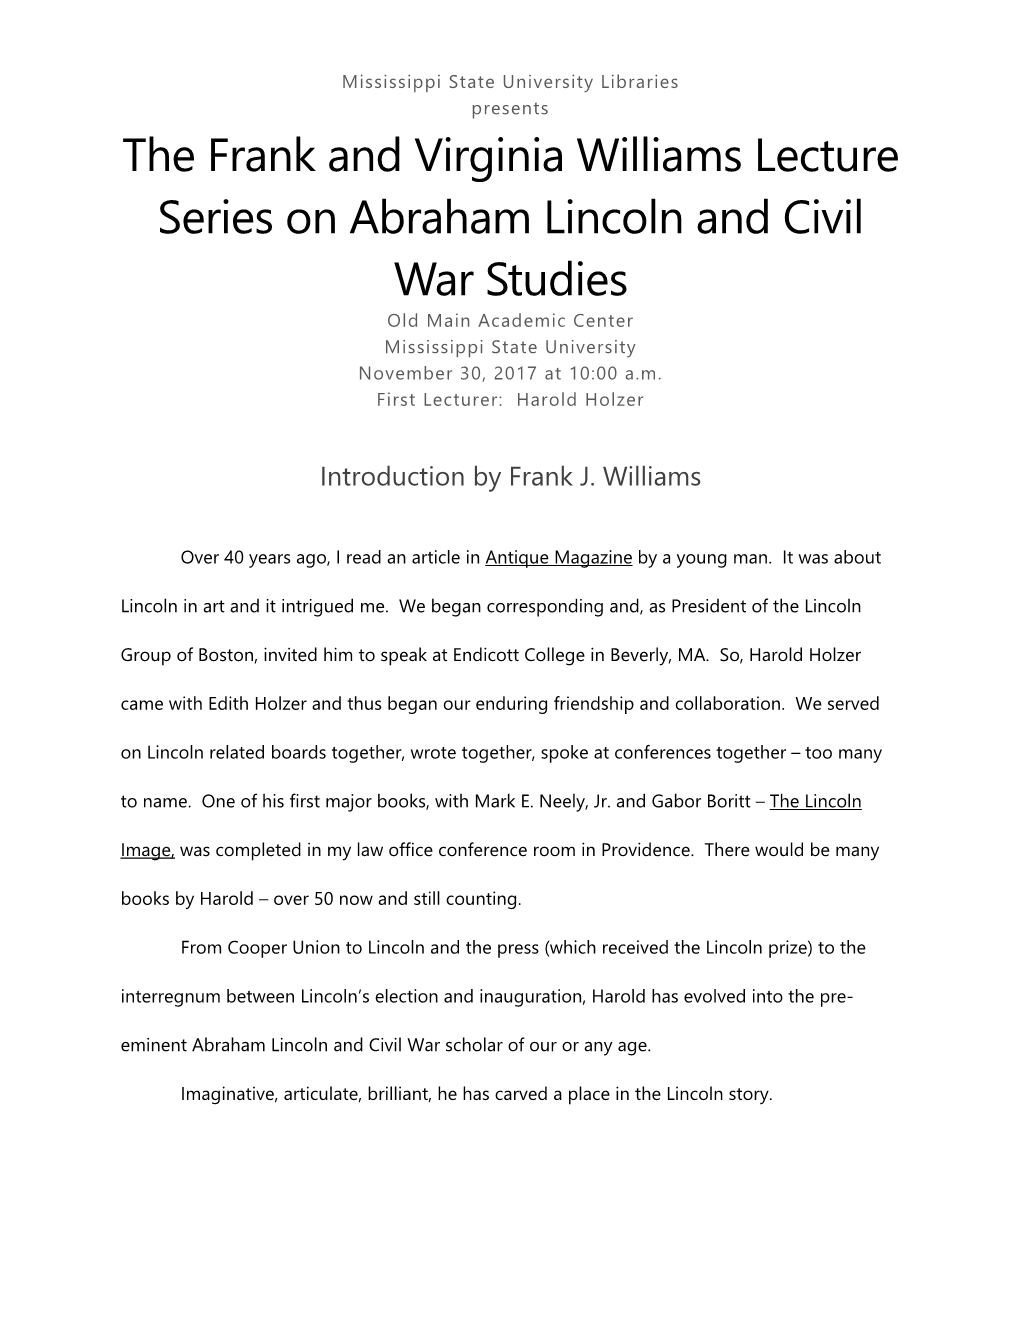 The Frank and Virginia Williams Lecture Series on Abraham Lincoln